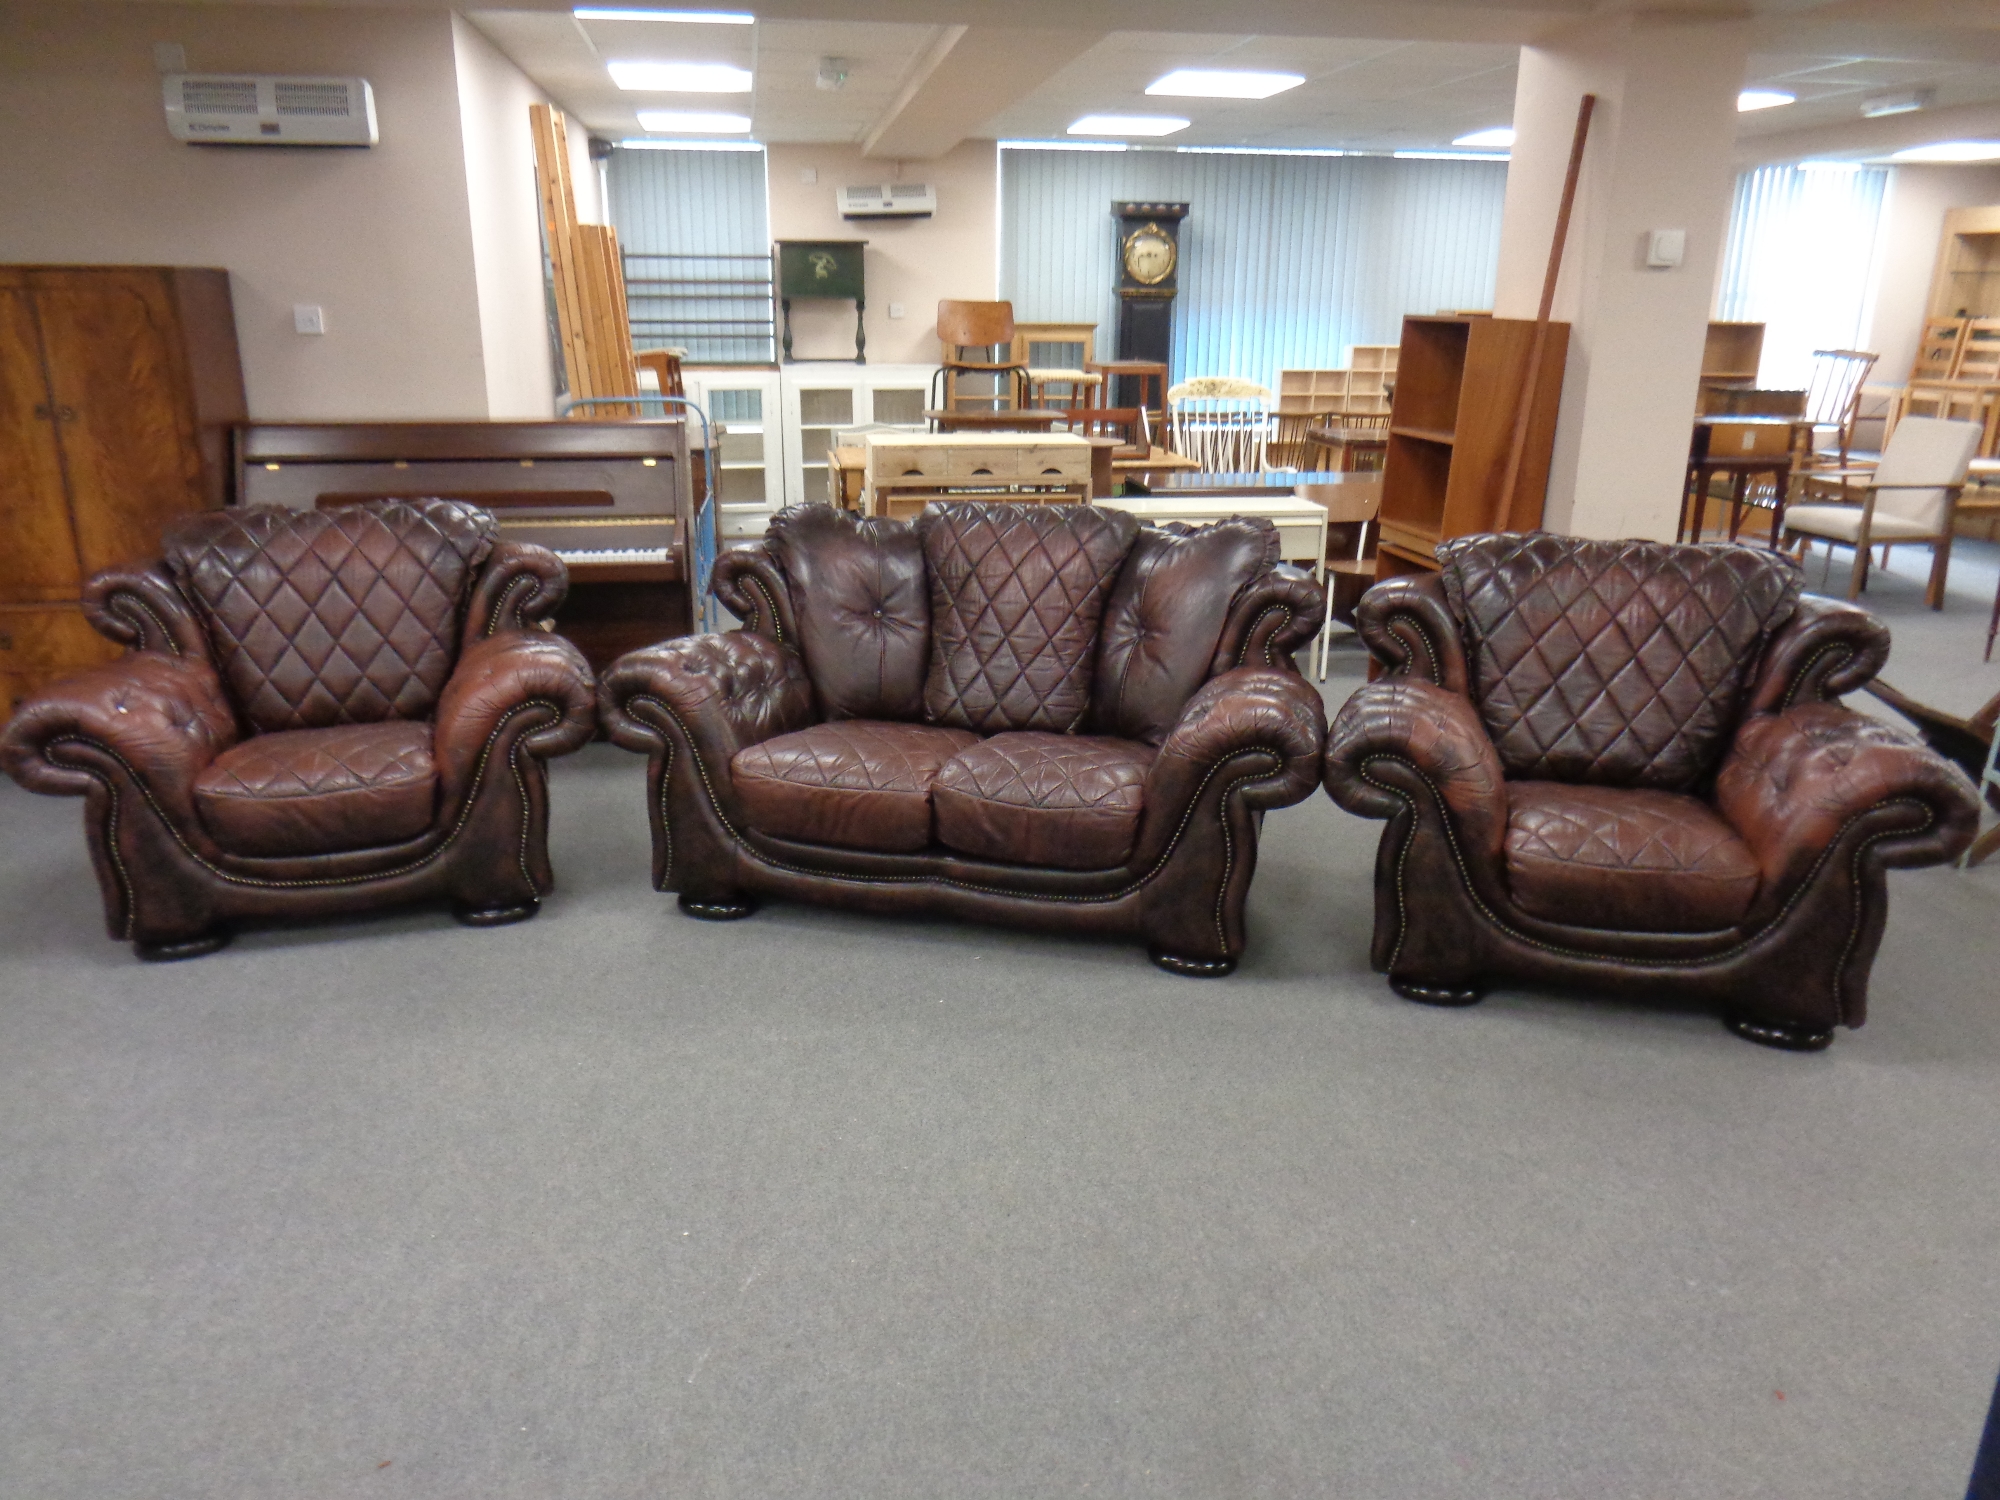 An Italian Rubelli three piece brown leather Chesterfield suite comprising two seater settee and